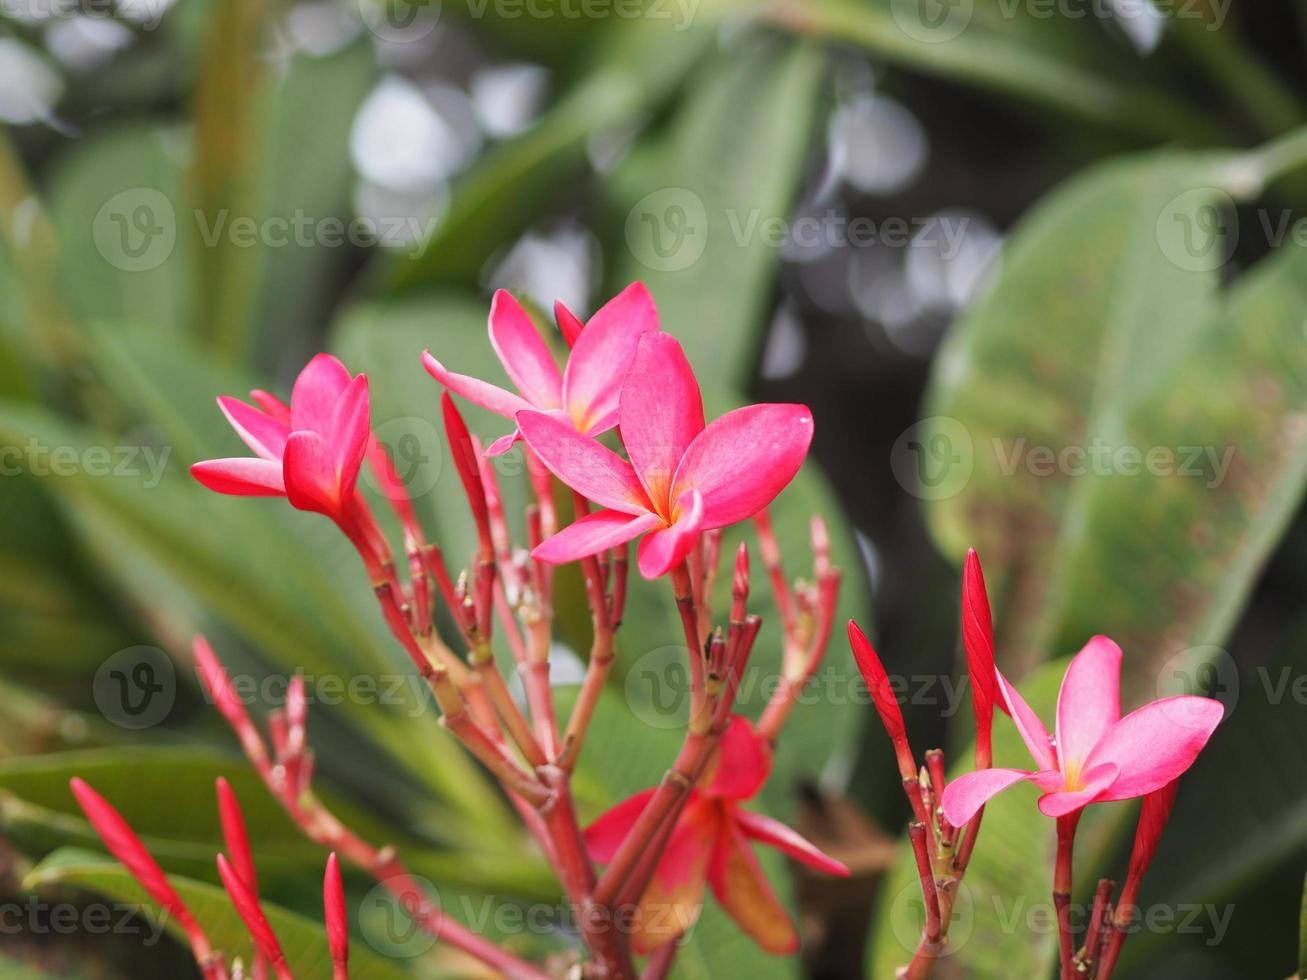 Sweet Oleander, Rose Bay, Nerium oleander name pink flower tree in garden on blurred of nature background, leaves are single oval shape, The tip and the base of the pointed thick hard with dark green photo